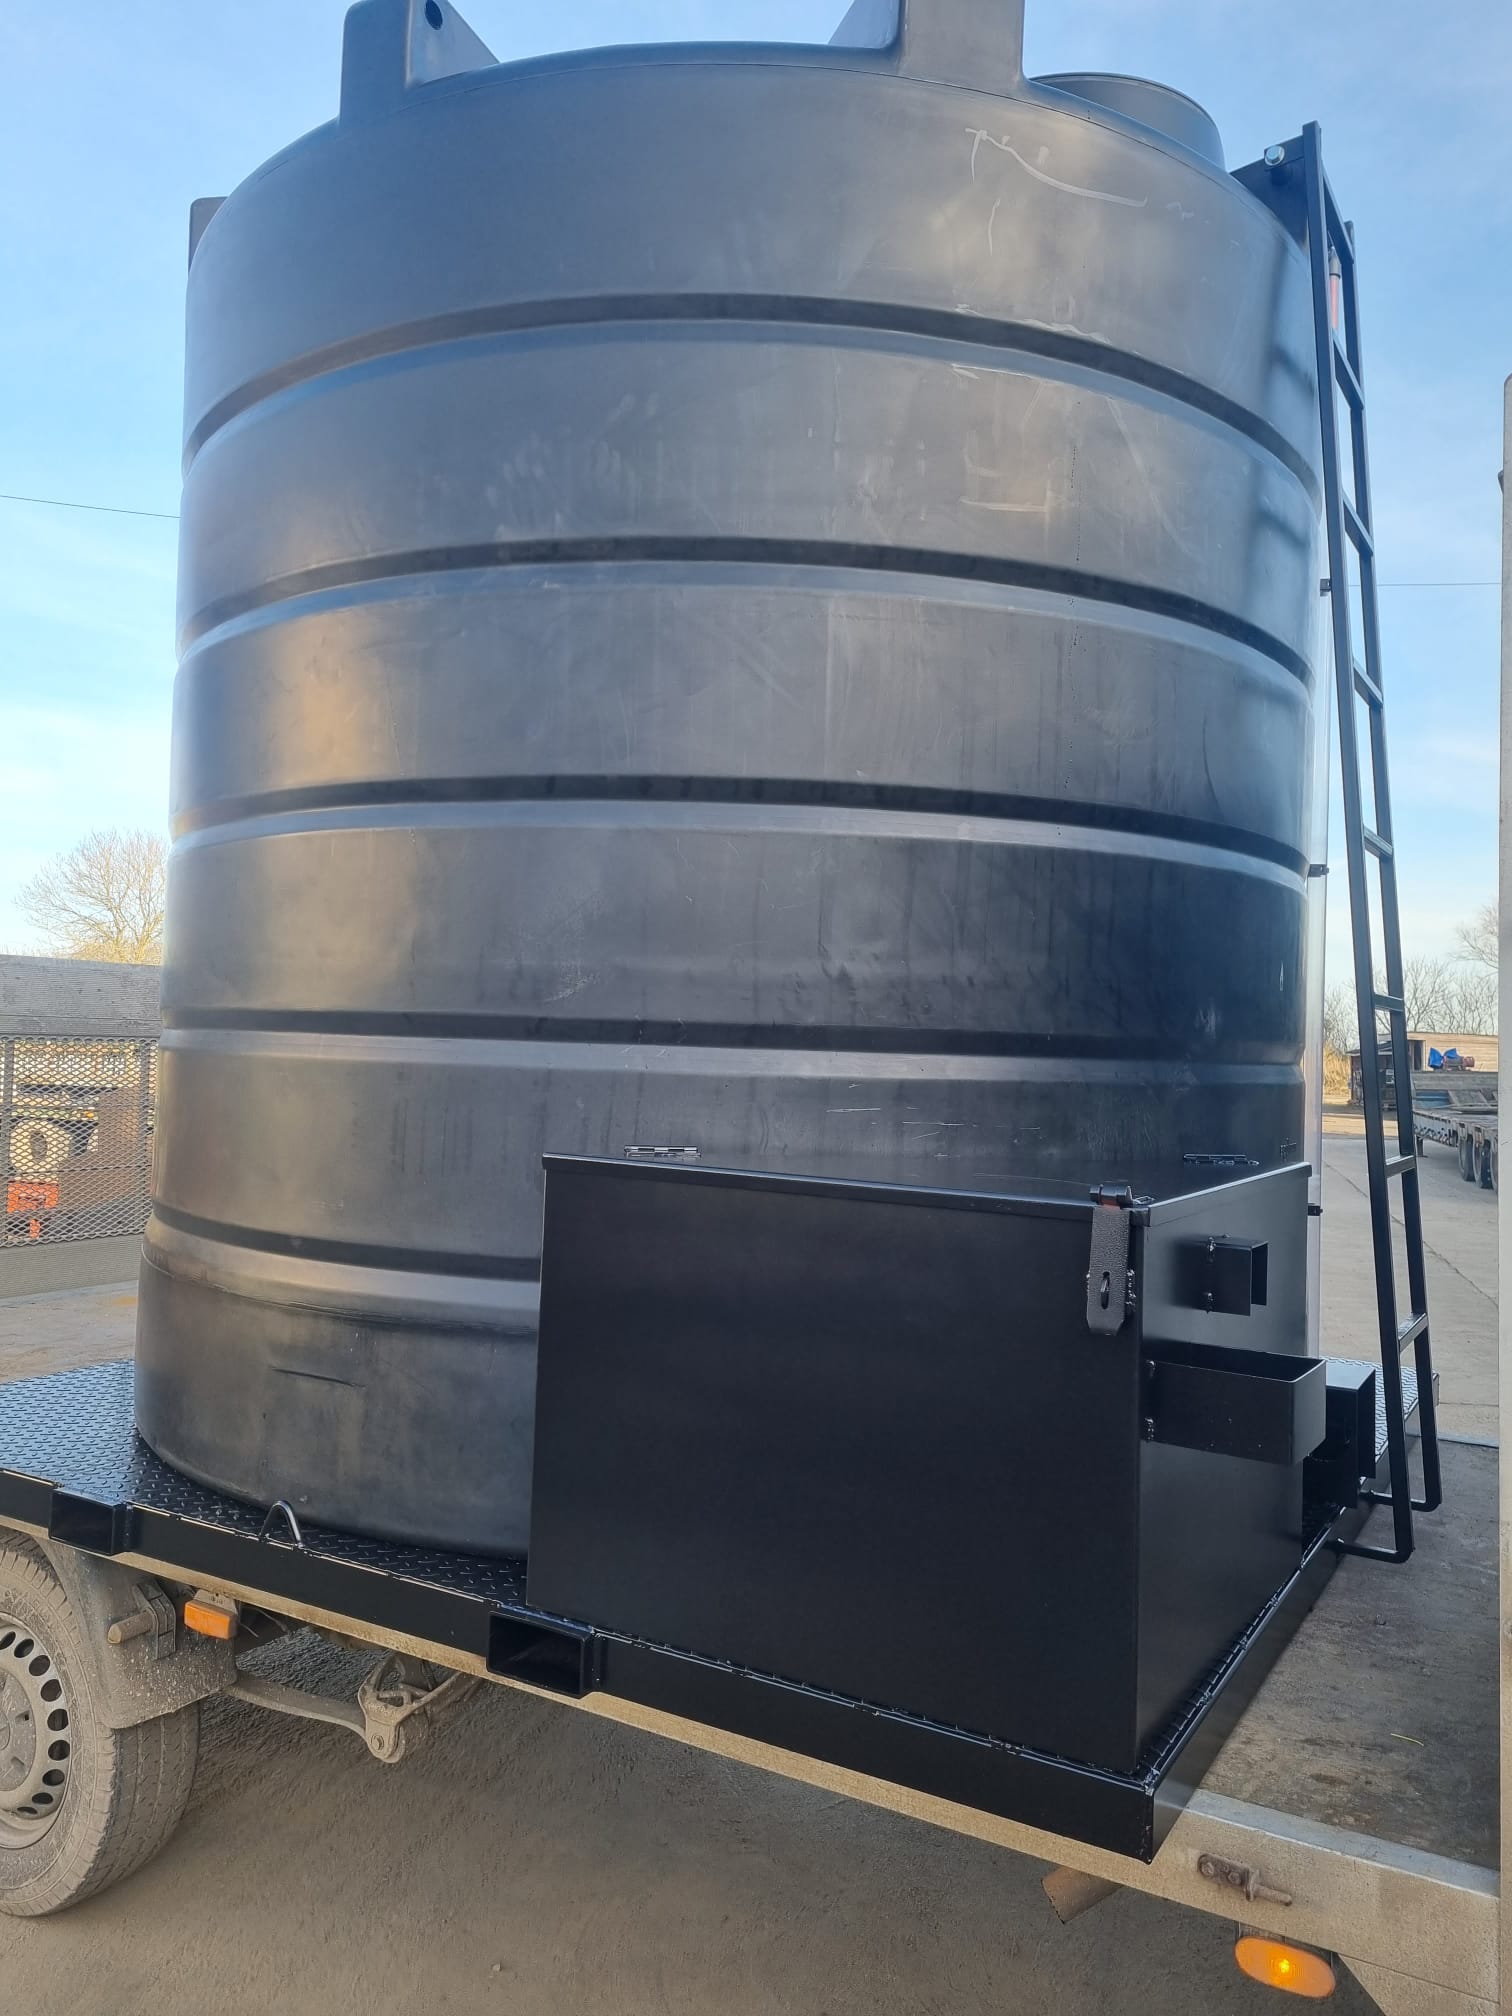 Affordable 10,000ltr Water Tank, With On Demand Pump To Hire In Norfolk